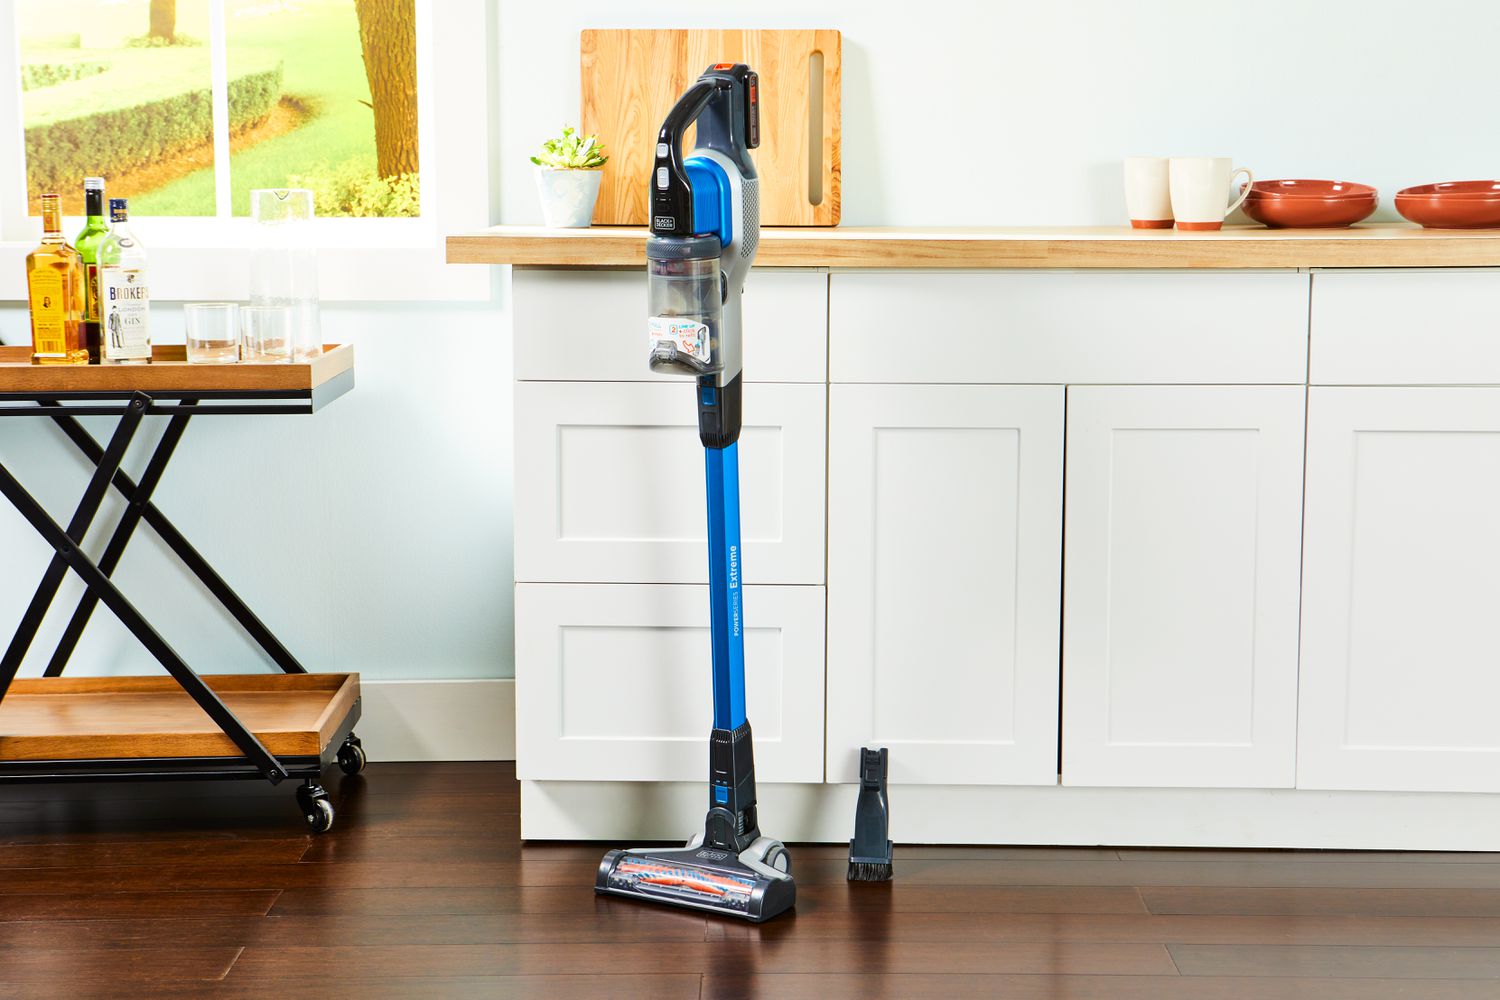 BLACK+DECKER Powerseries Extreme Cordless Stick Vacuum Cleaner displayed in front of a kitchen counter